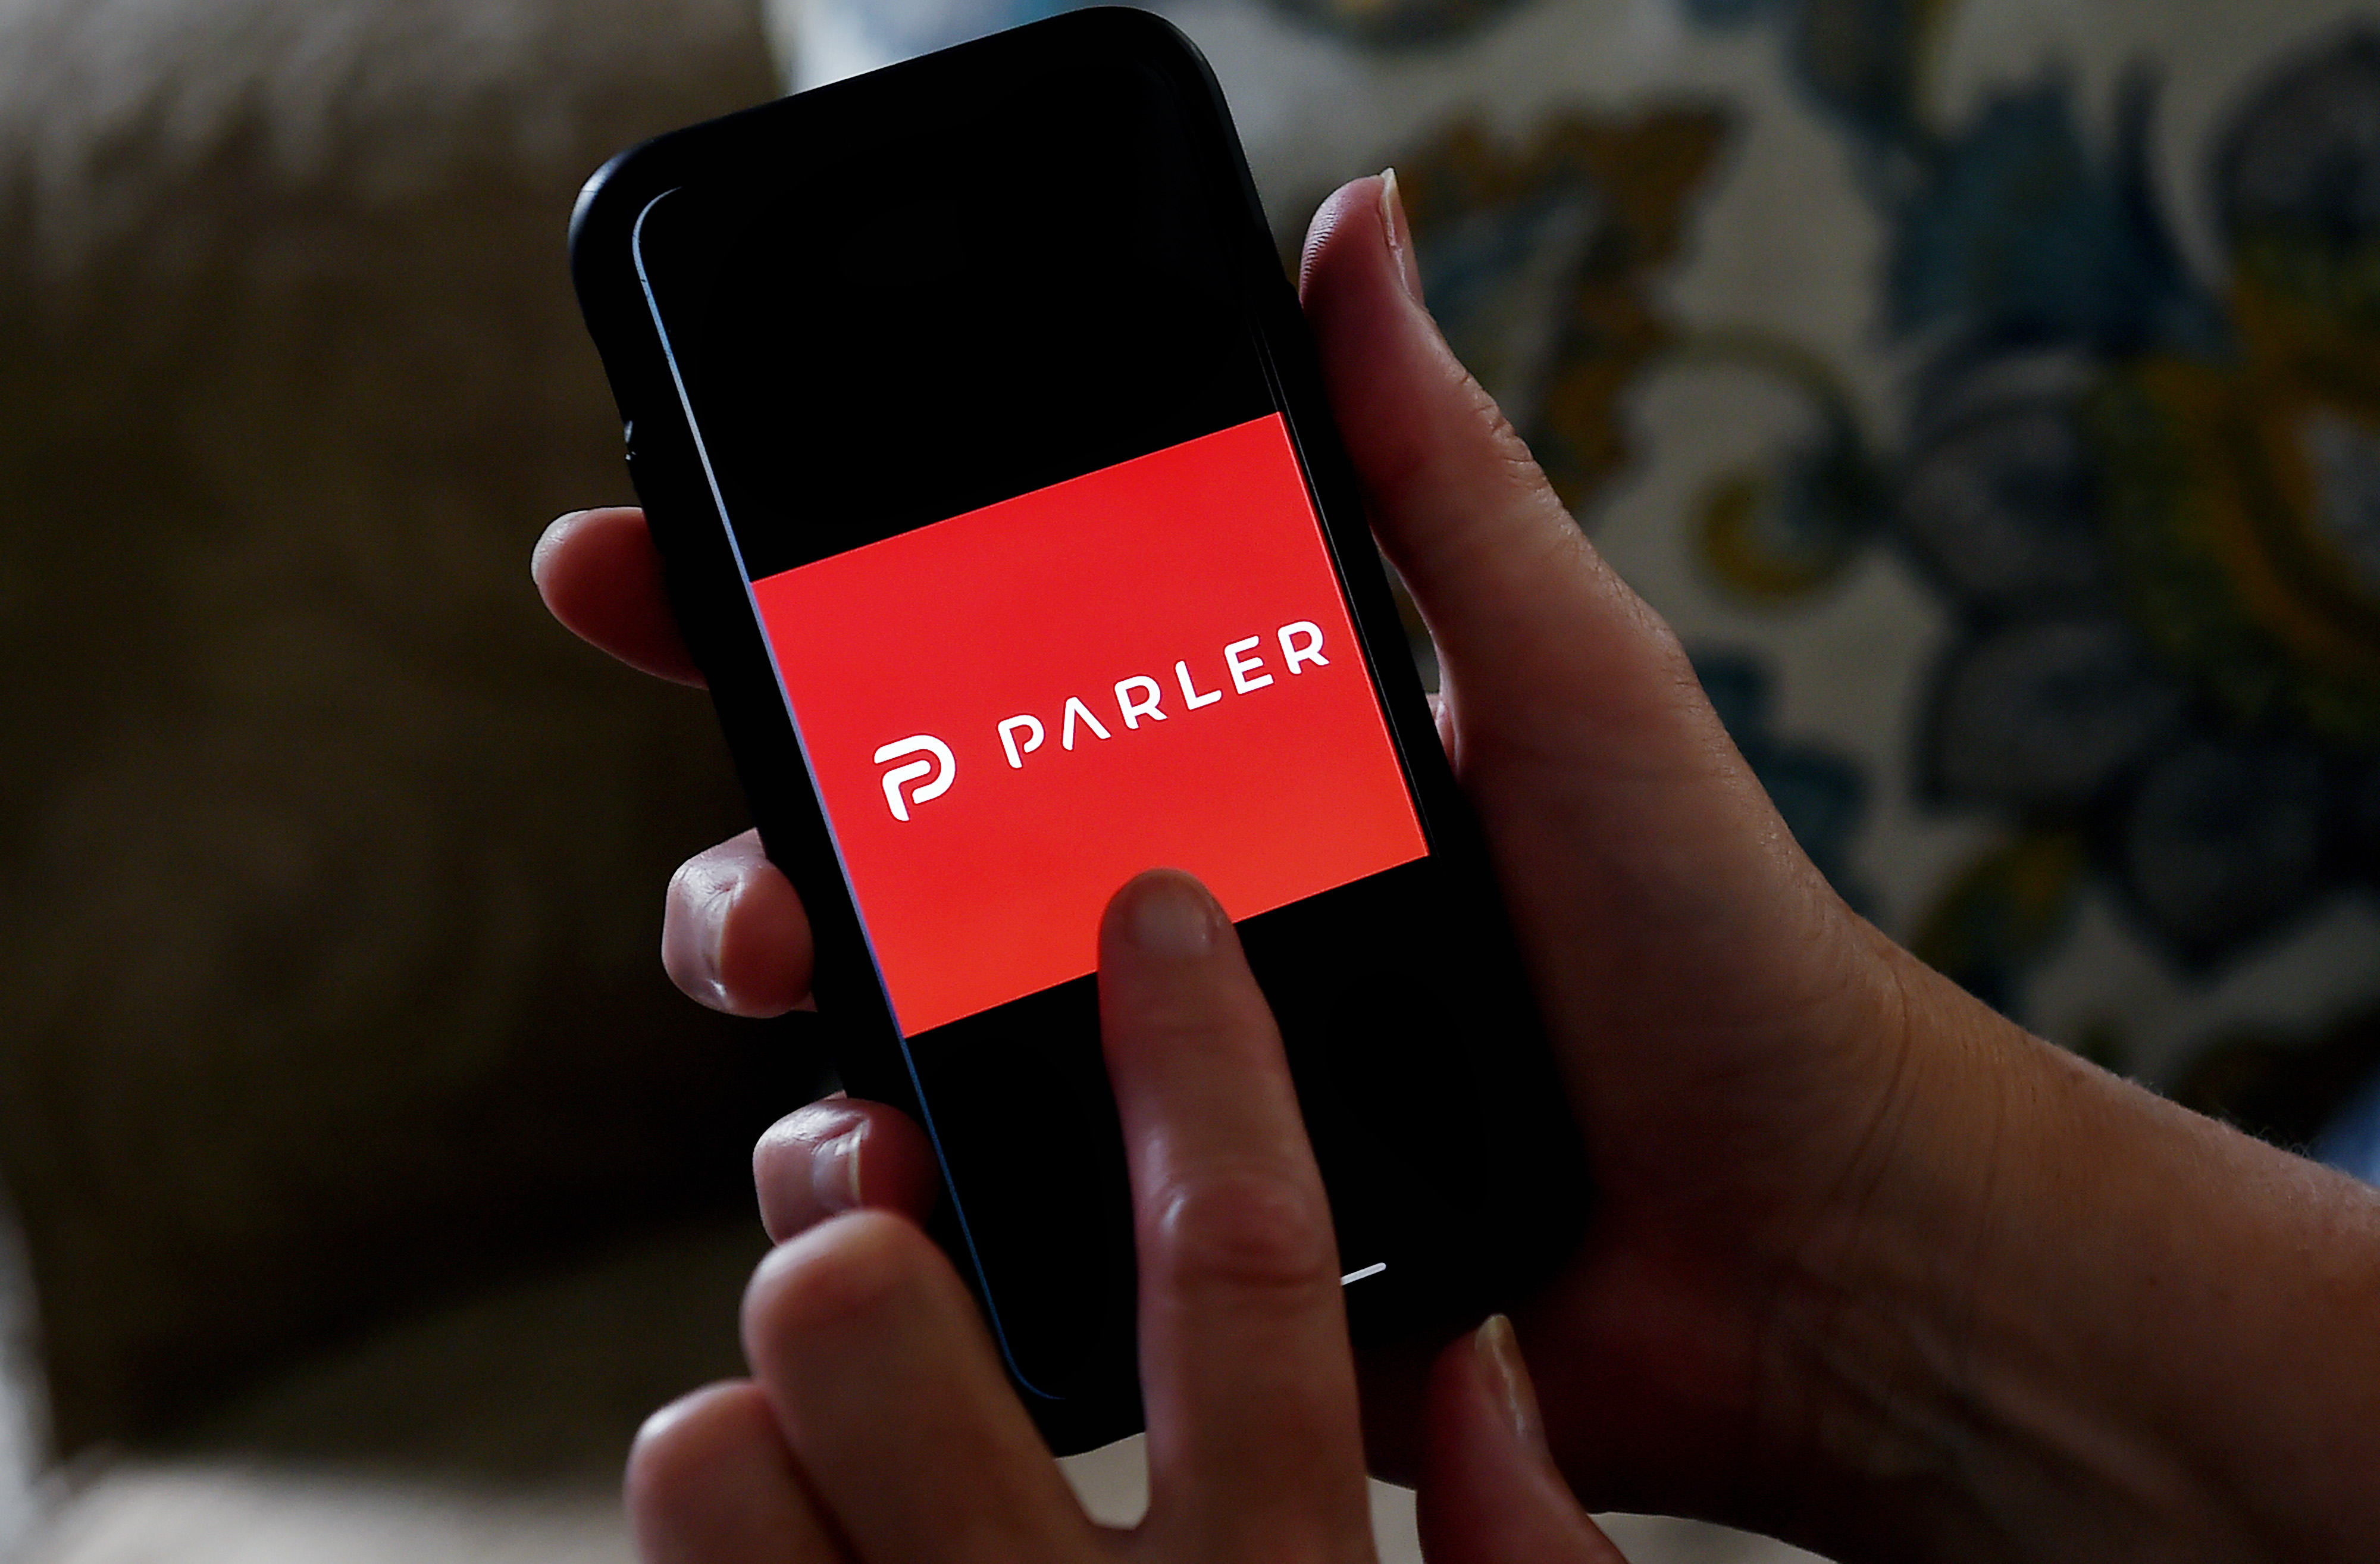 A person holds a smartphone and points to the logo for Parler on the screen.